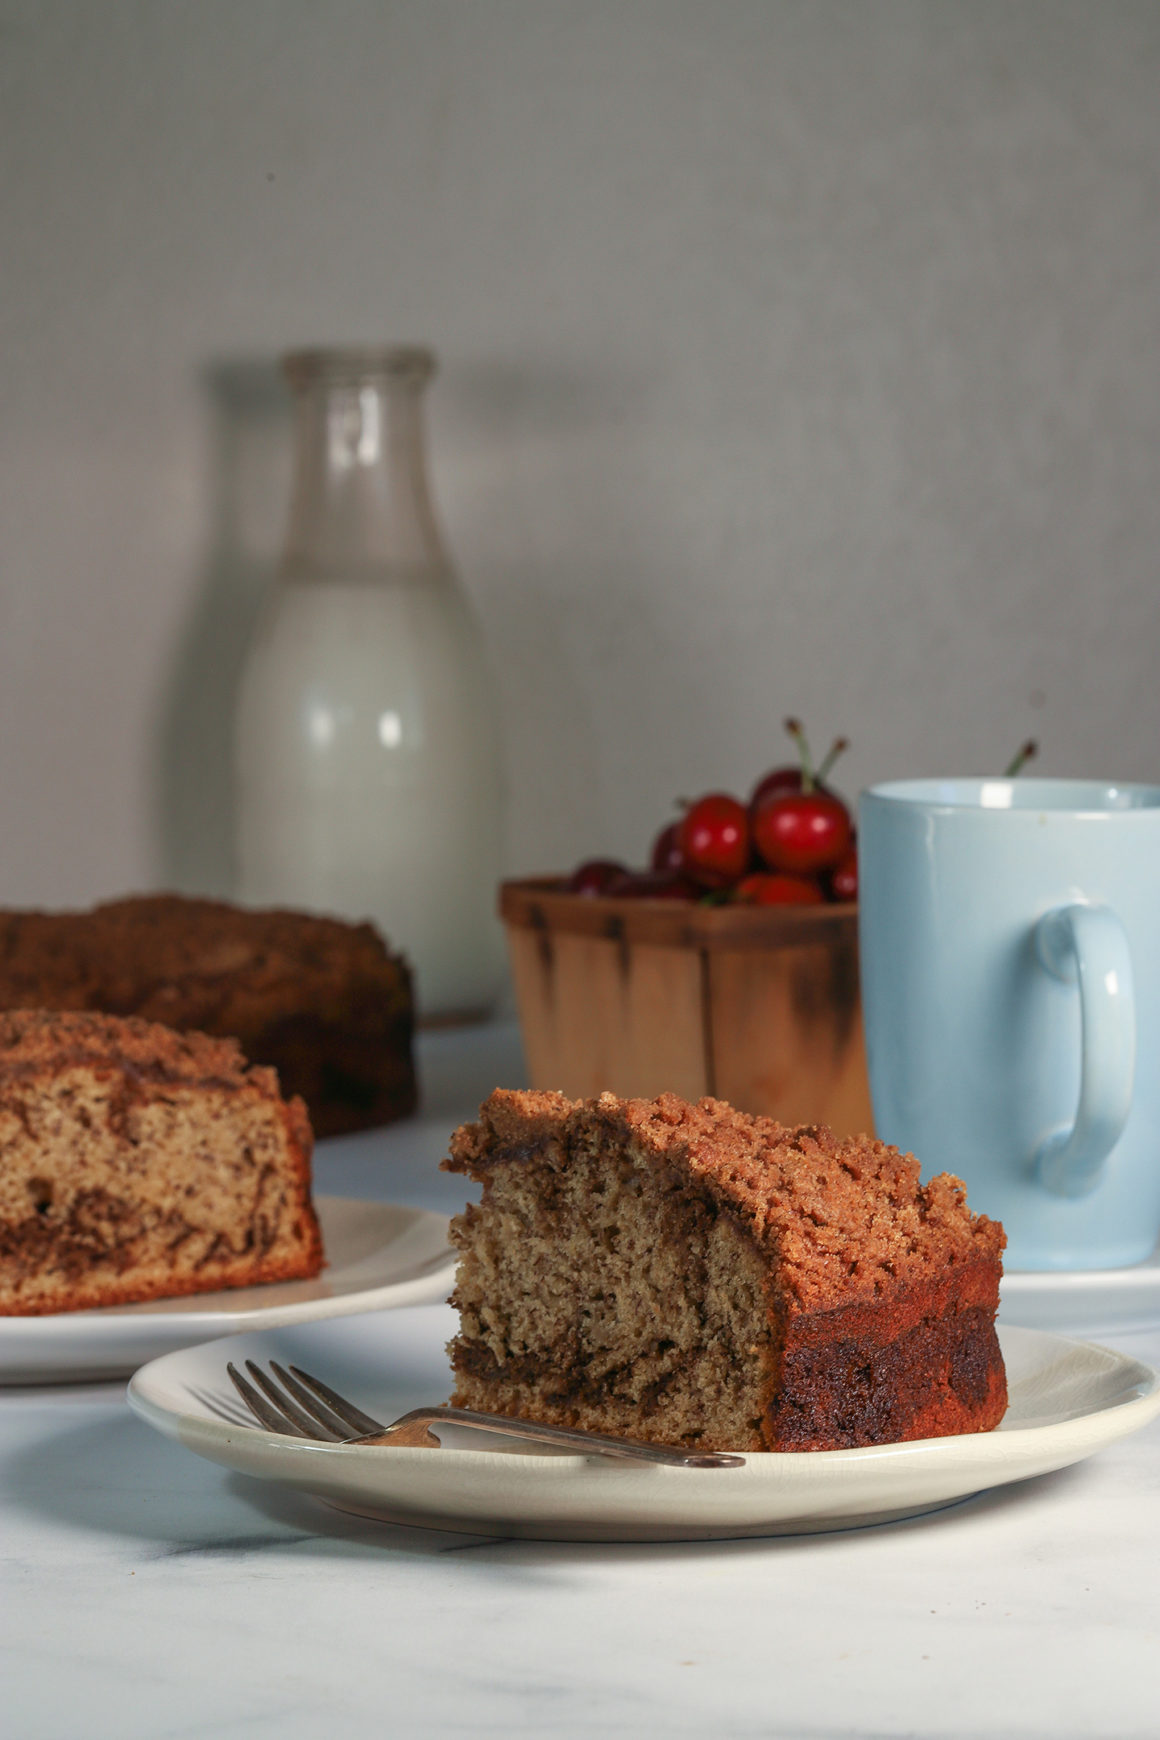 Banana Cake Slices with Cherries and Coffee